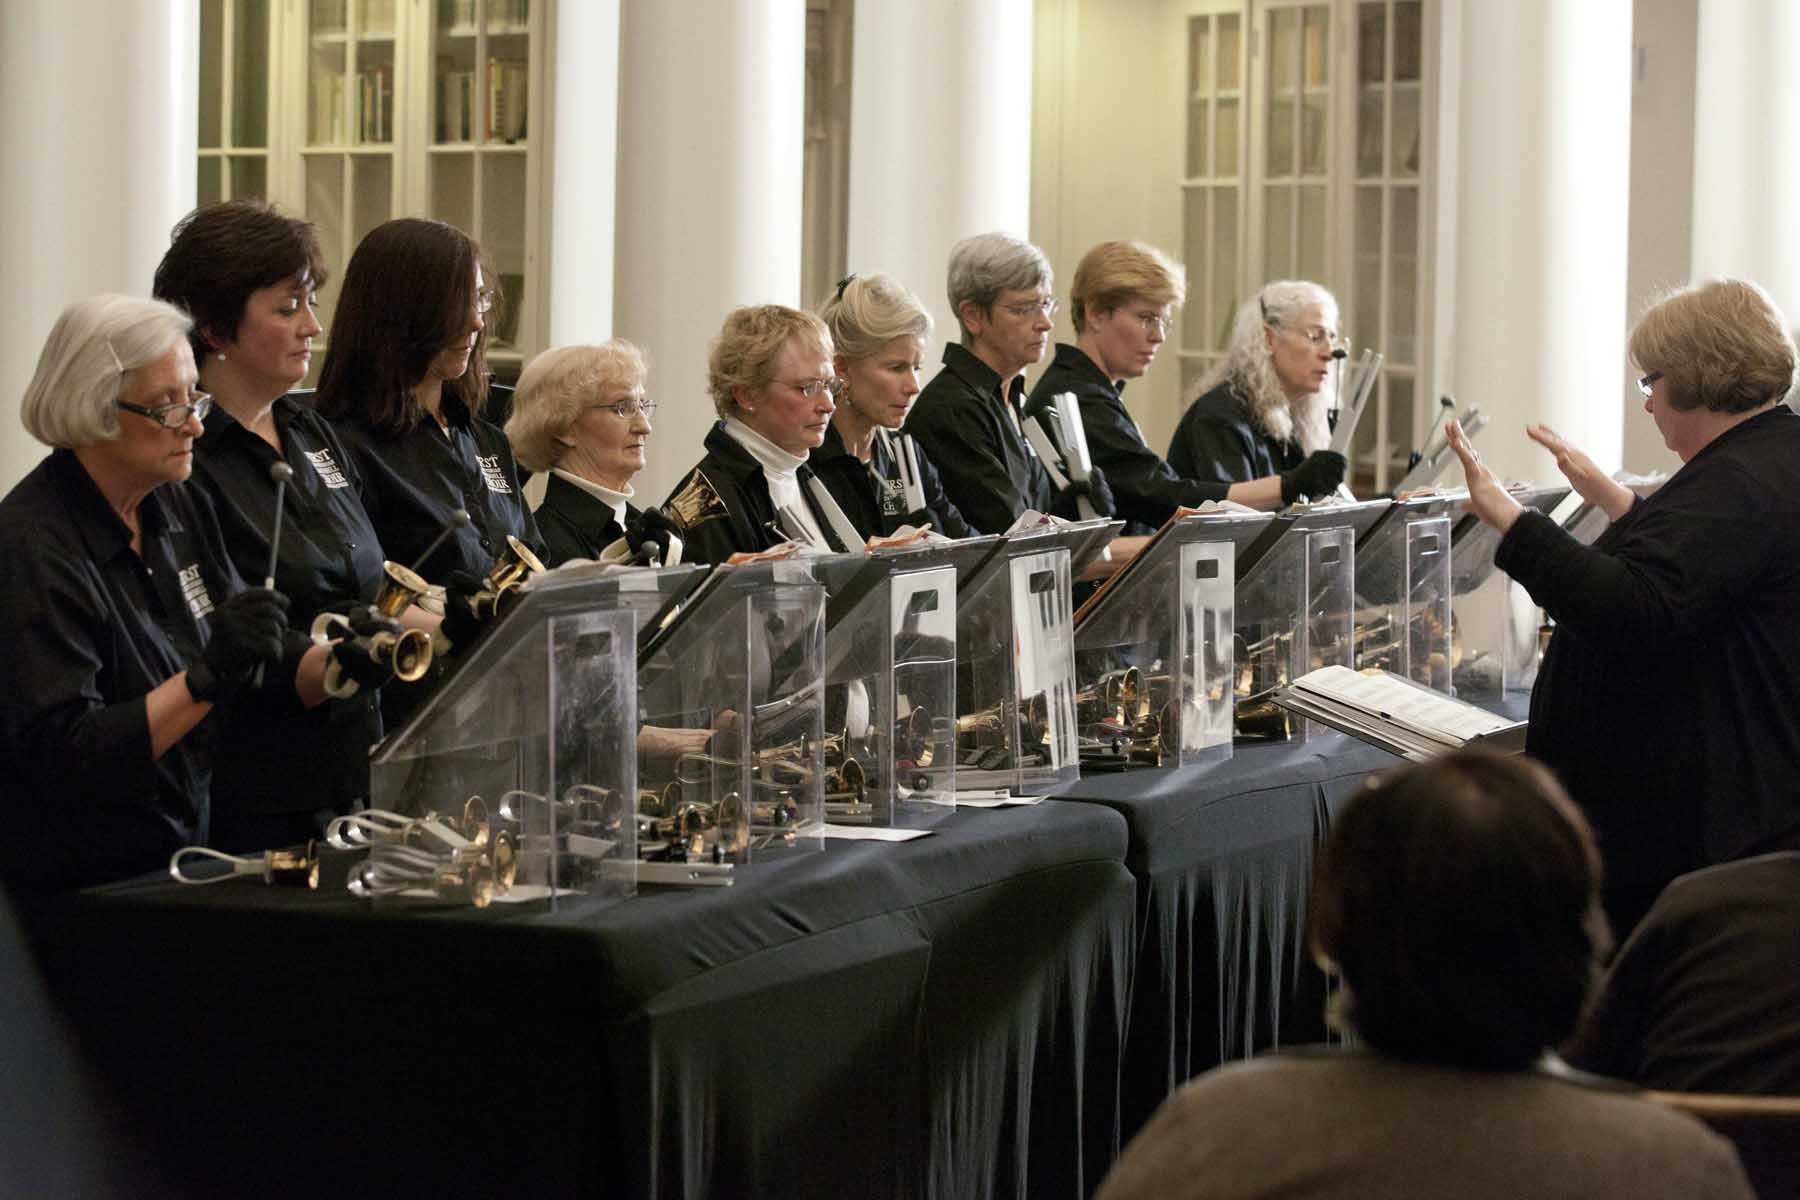 The handbell choir of Charlottesville performing for a crowd